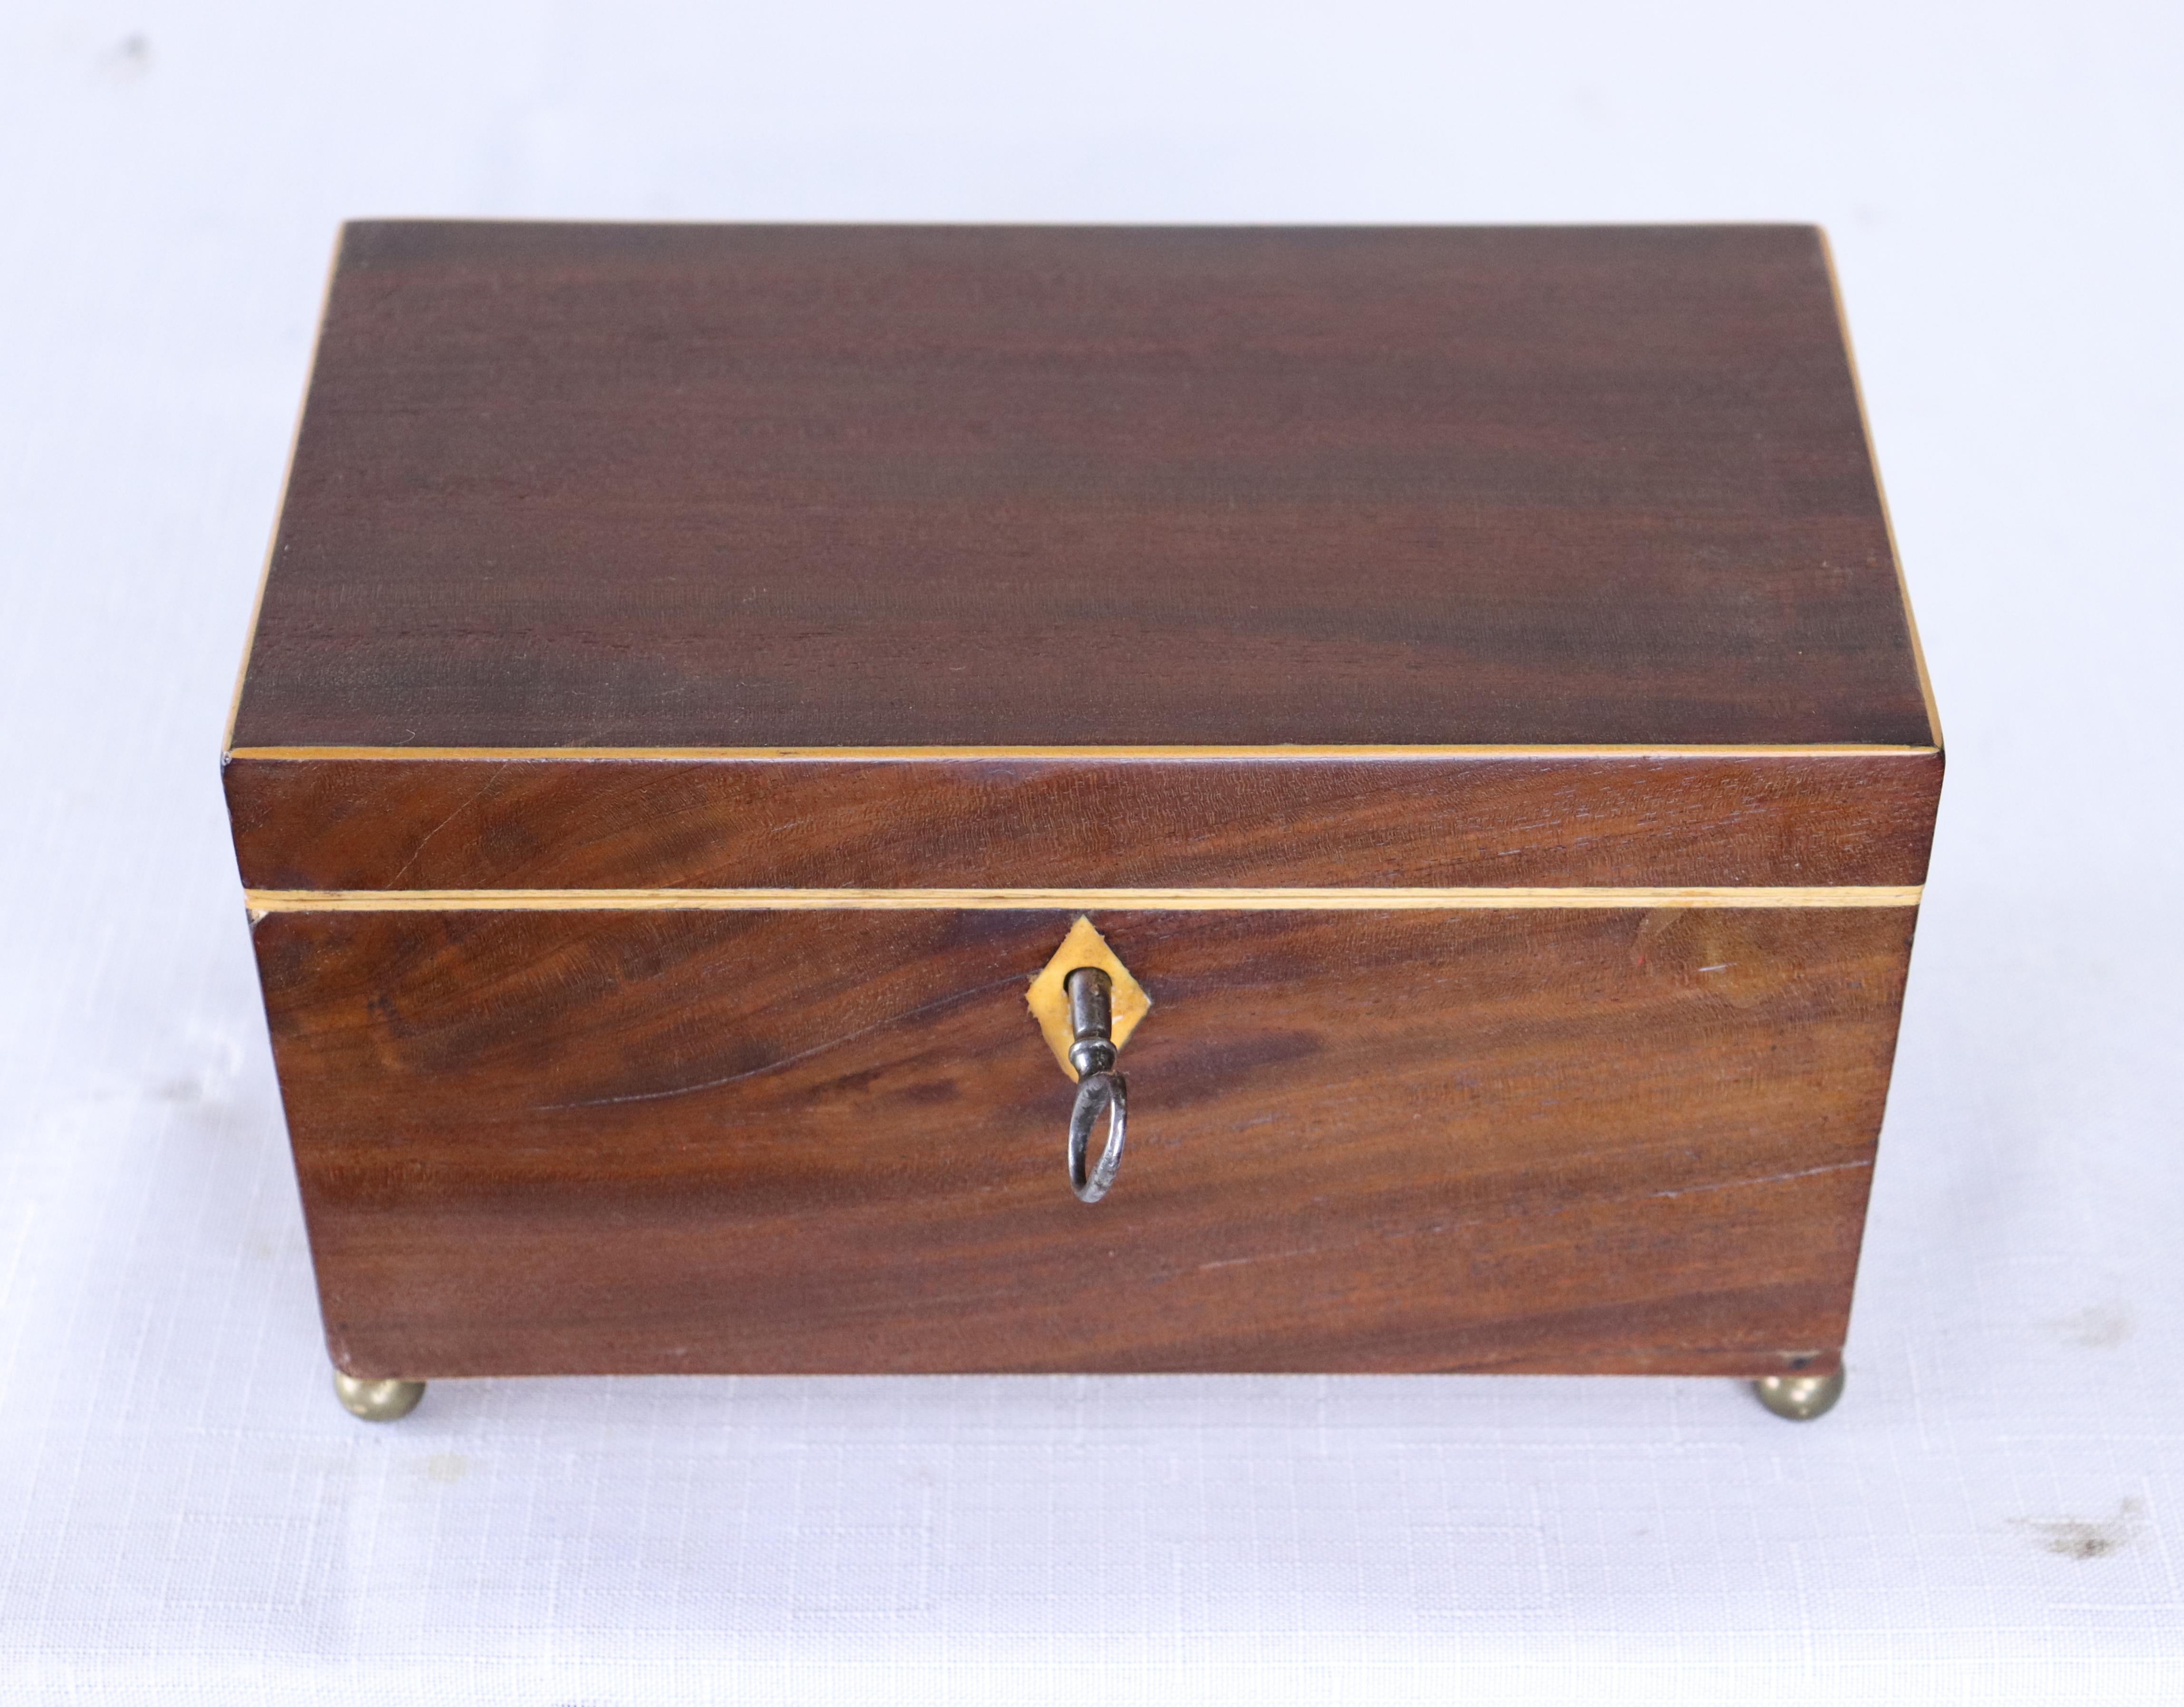 A beautiful Georgian tea caddy on charming ball feet. Two compartments inside with traces of the original paper. Good oak grain and nice patina all over. Original key.